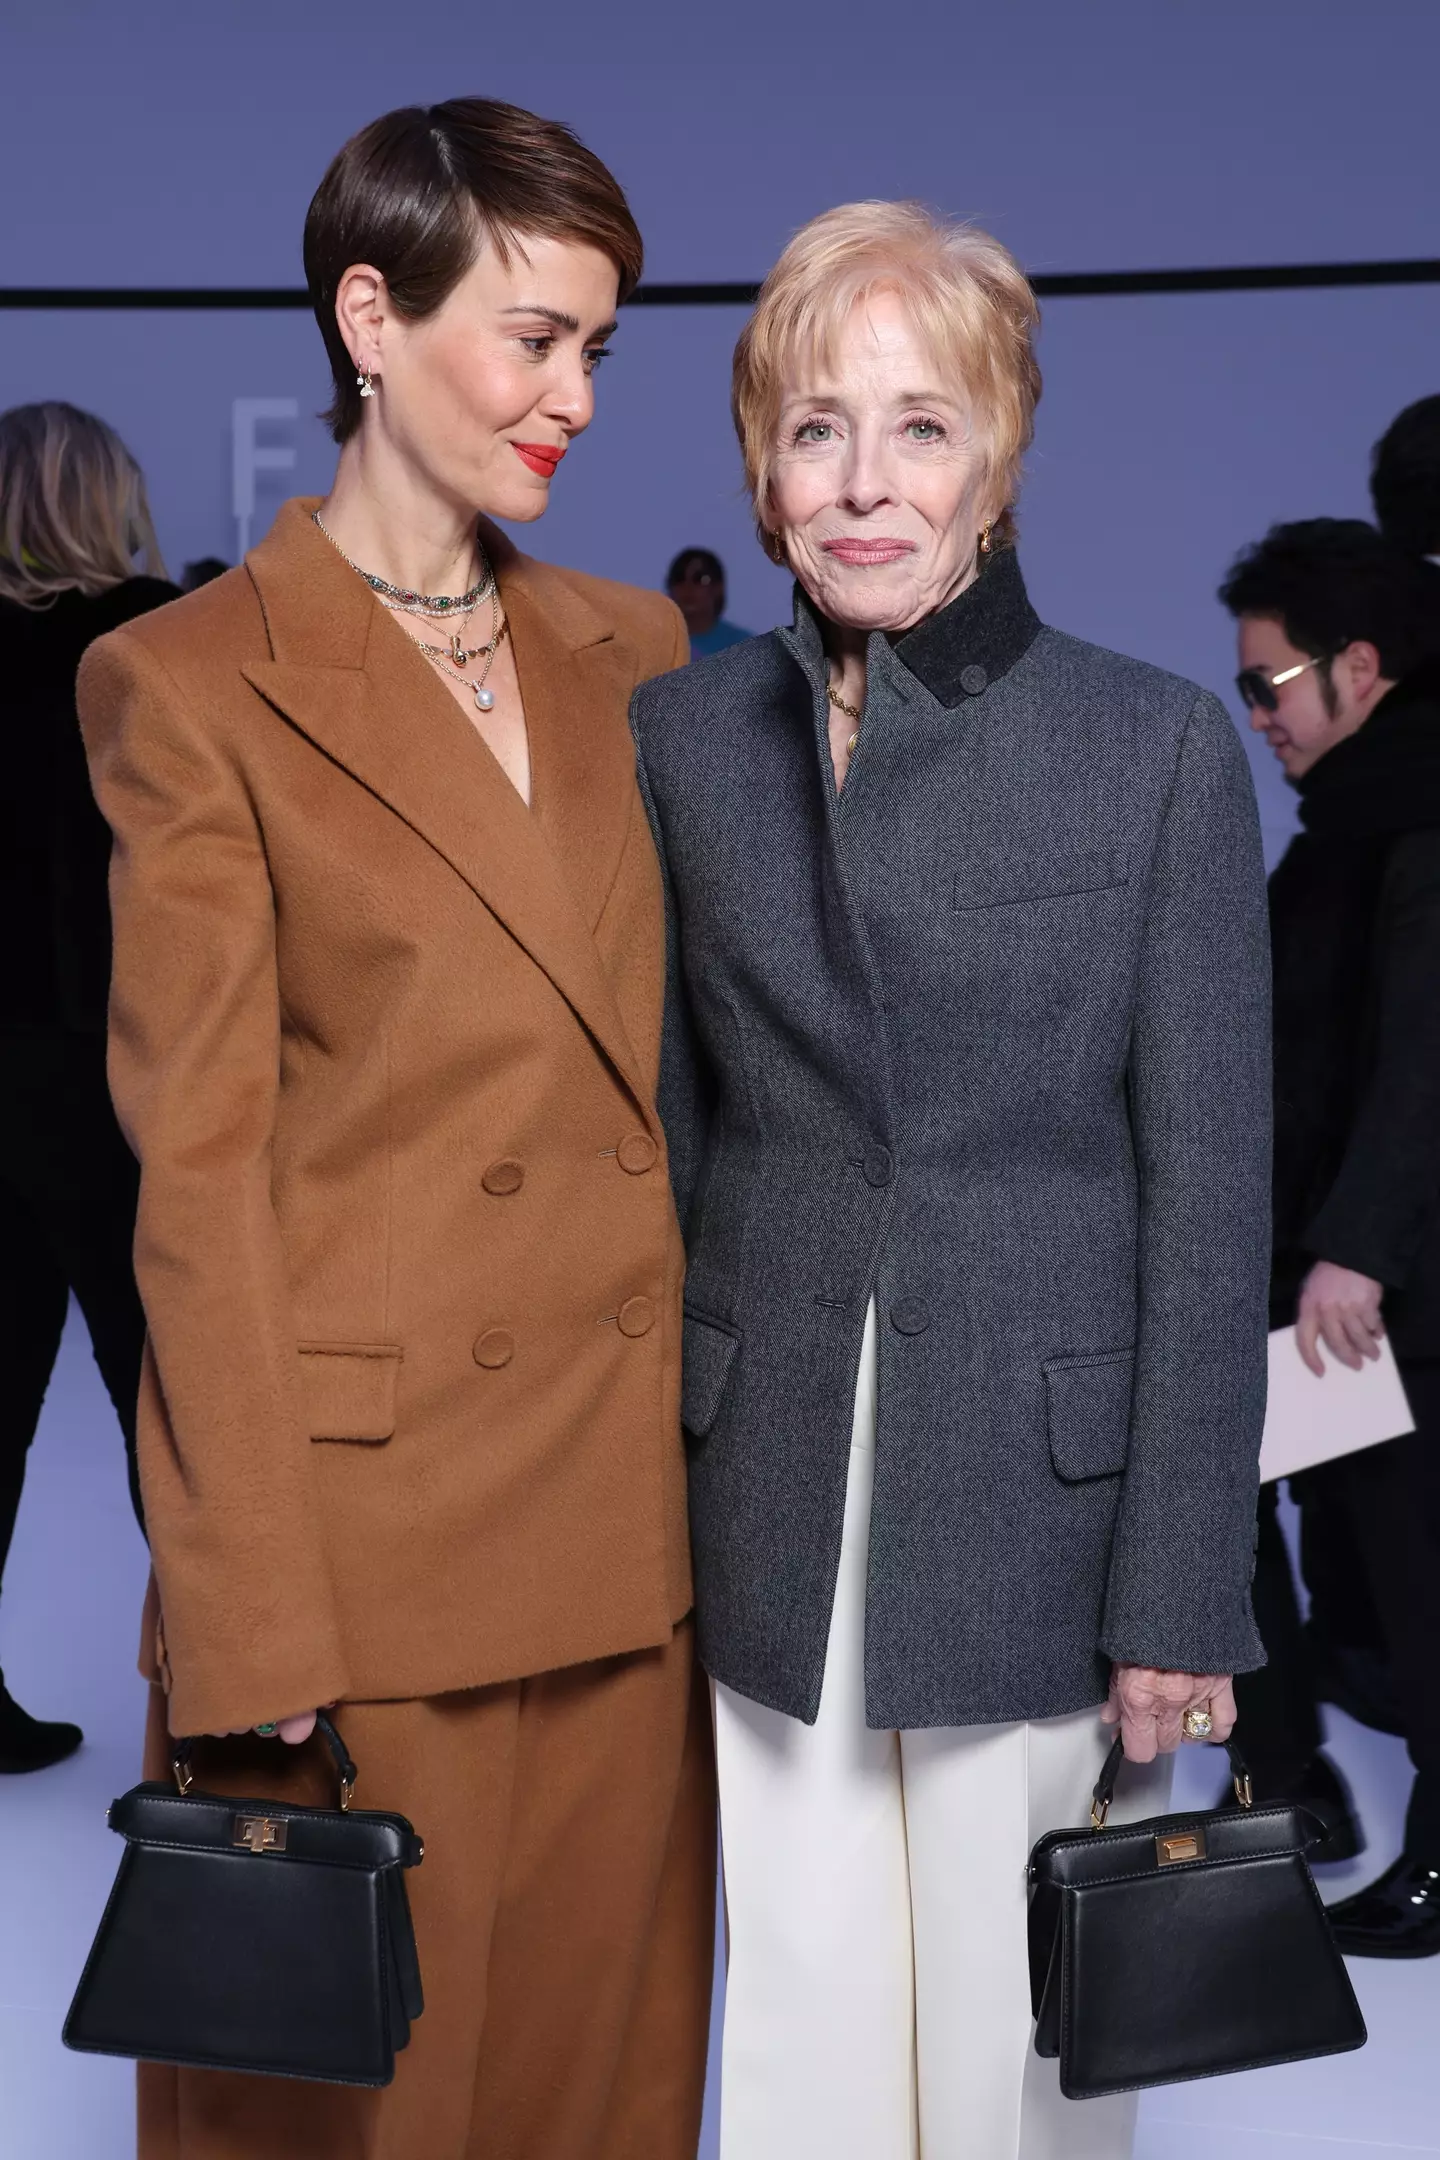 Sarah Paulson and Holland Taylor have been together since 2015.